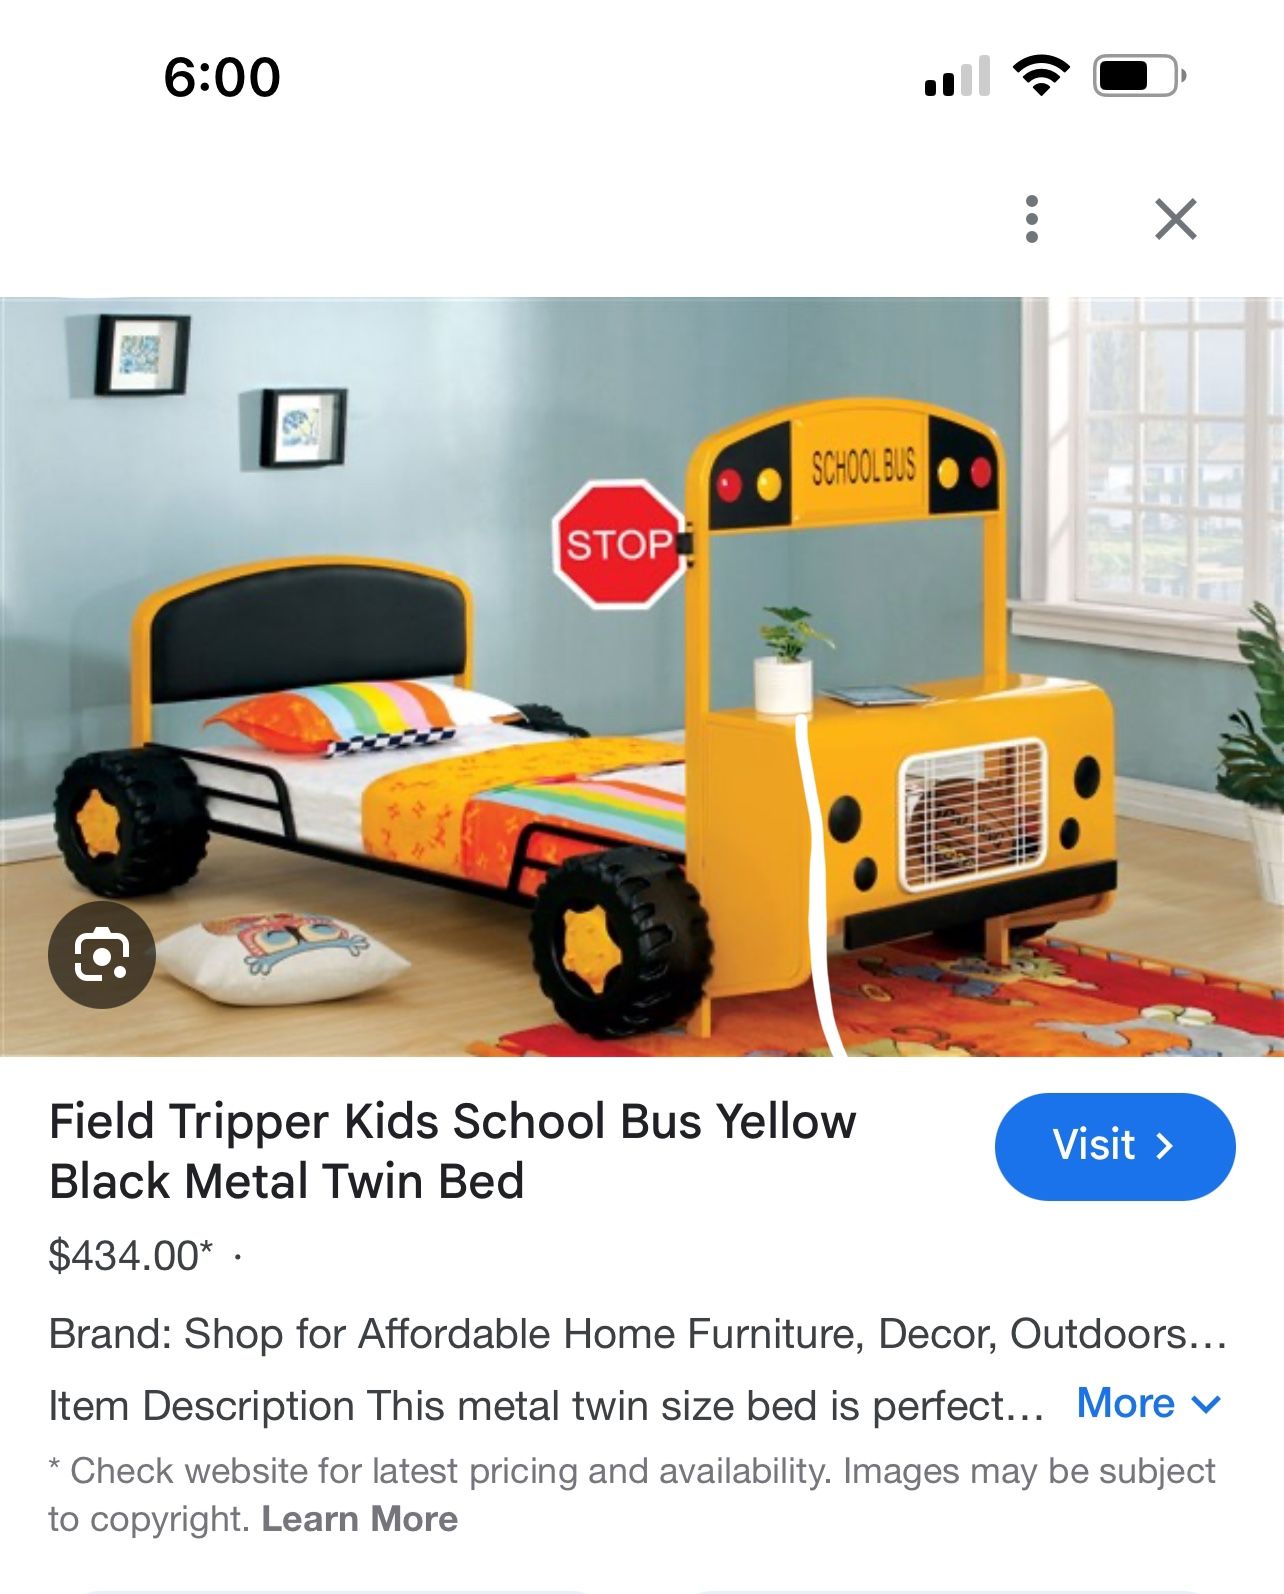 BUS BED FOR KIDS